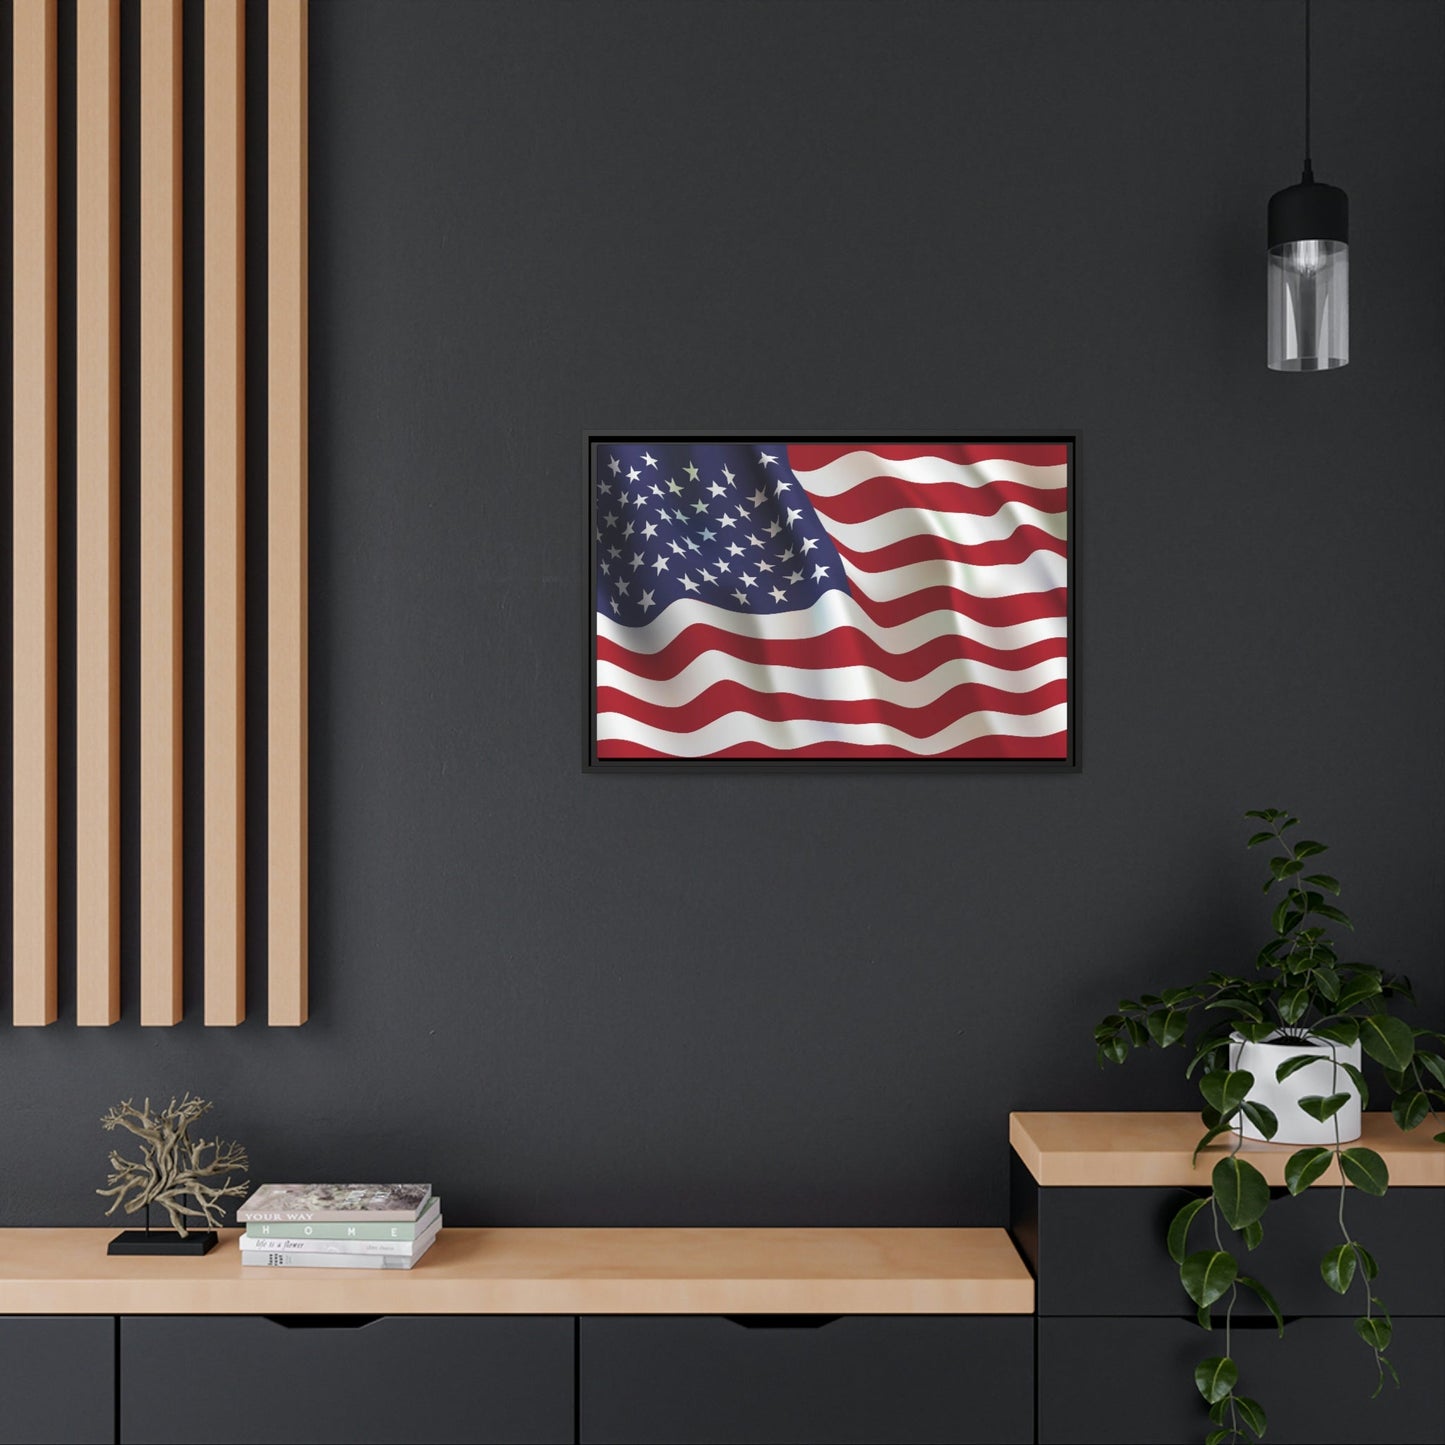 Patriotism at Its Finest: Canvas Print of the American Flag